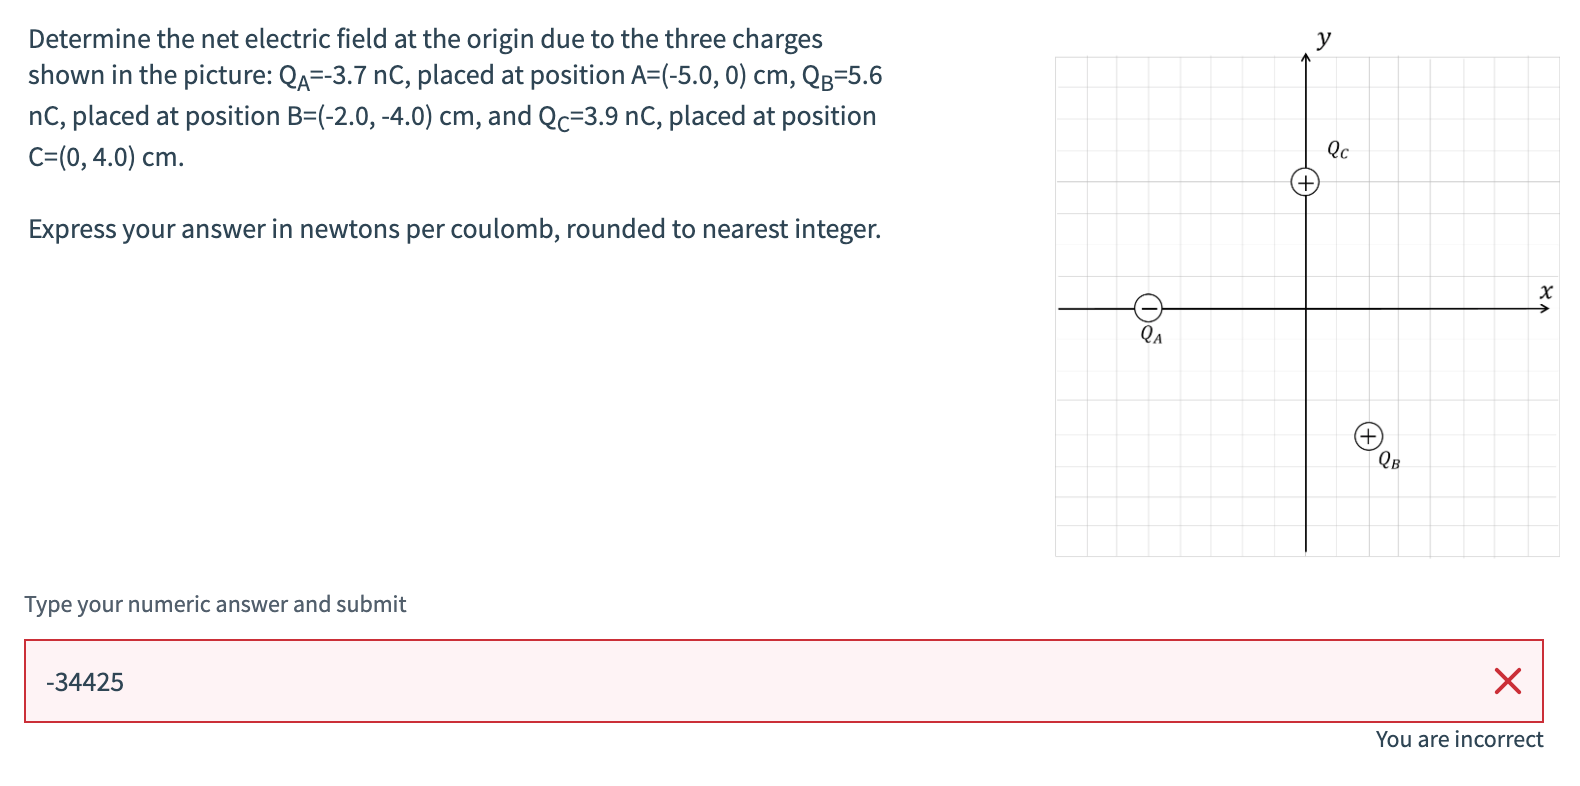 Determine the net electric field at the origin due to the three charges shown in the picture: QA=-3.7 nC,